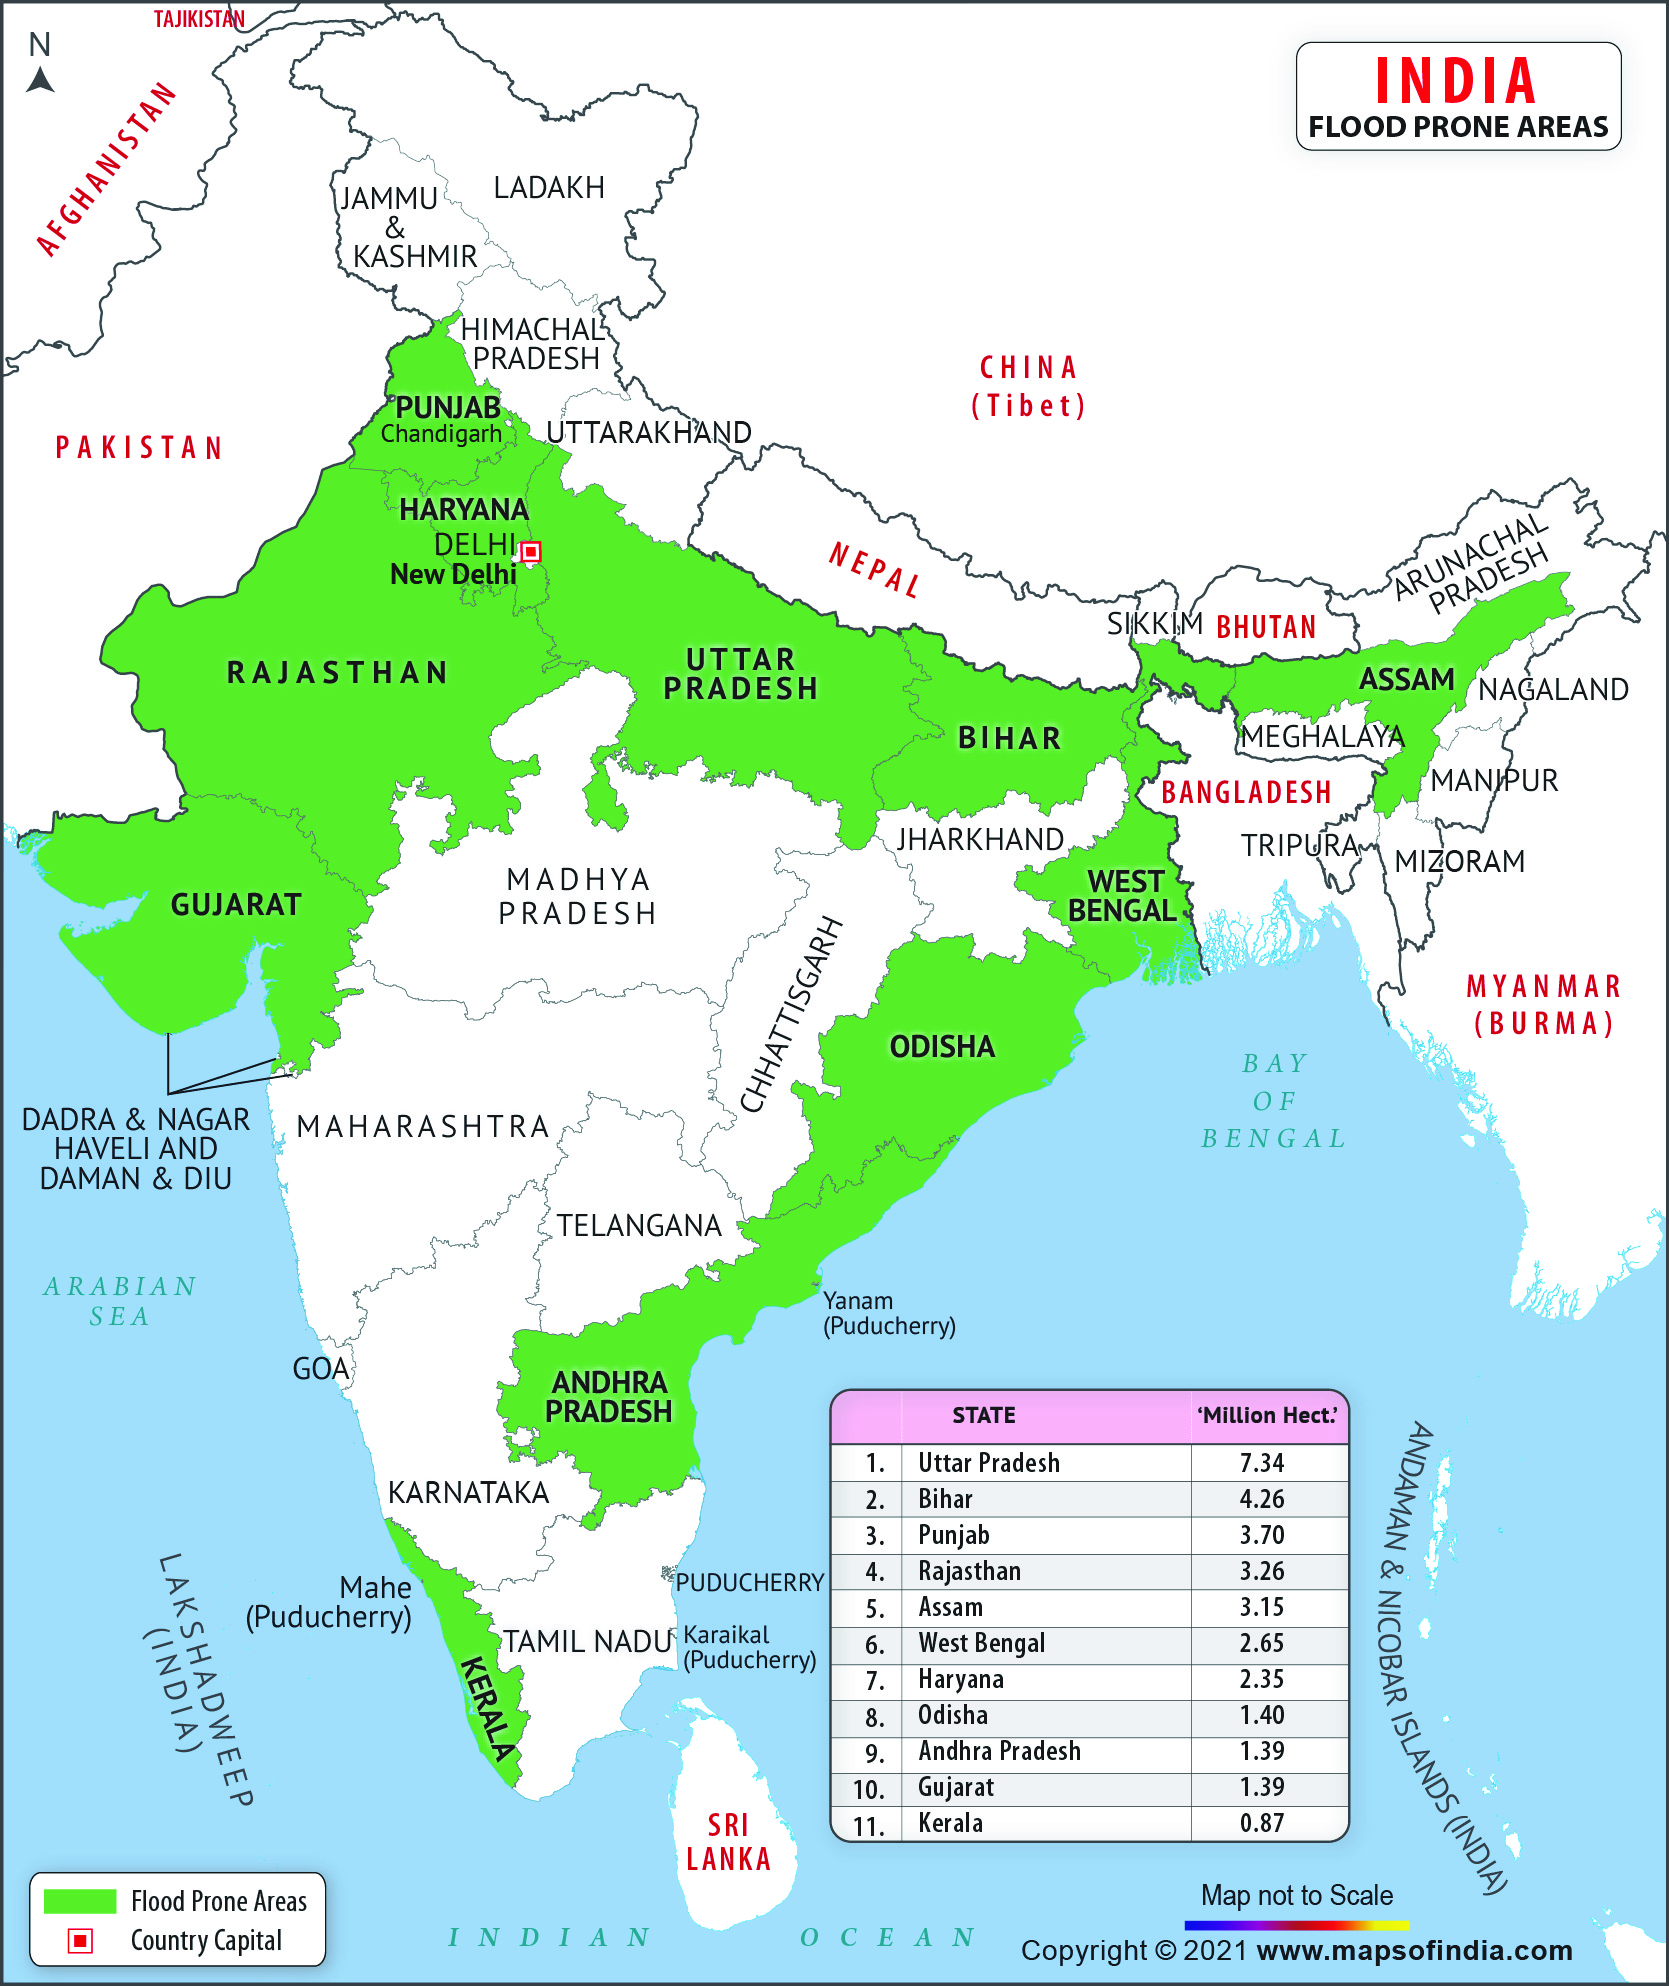 Map of India Flood Prone Areas